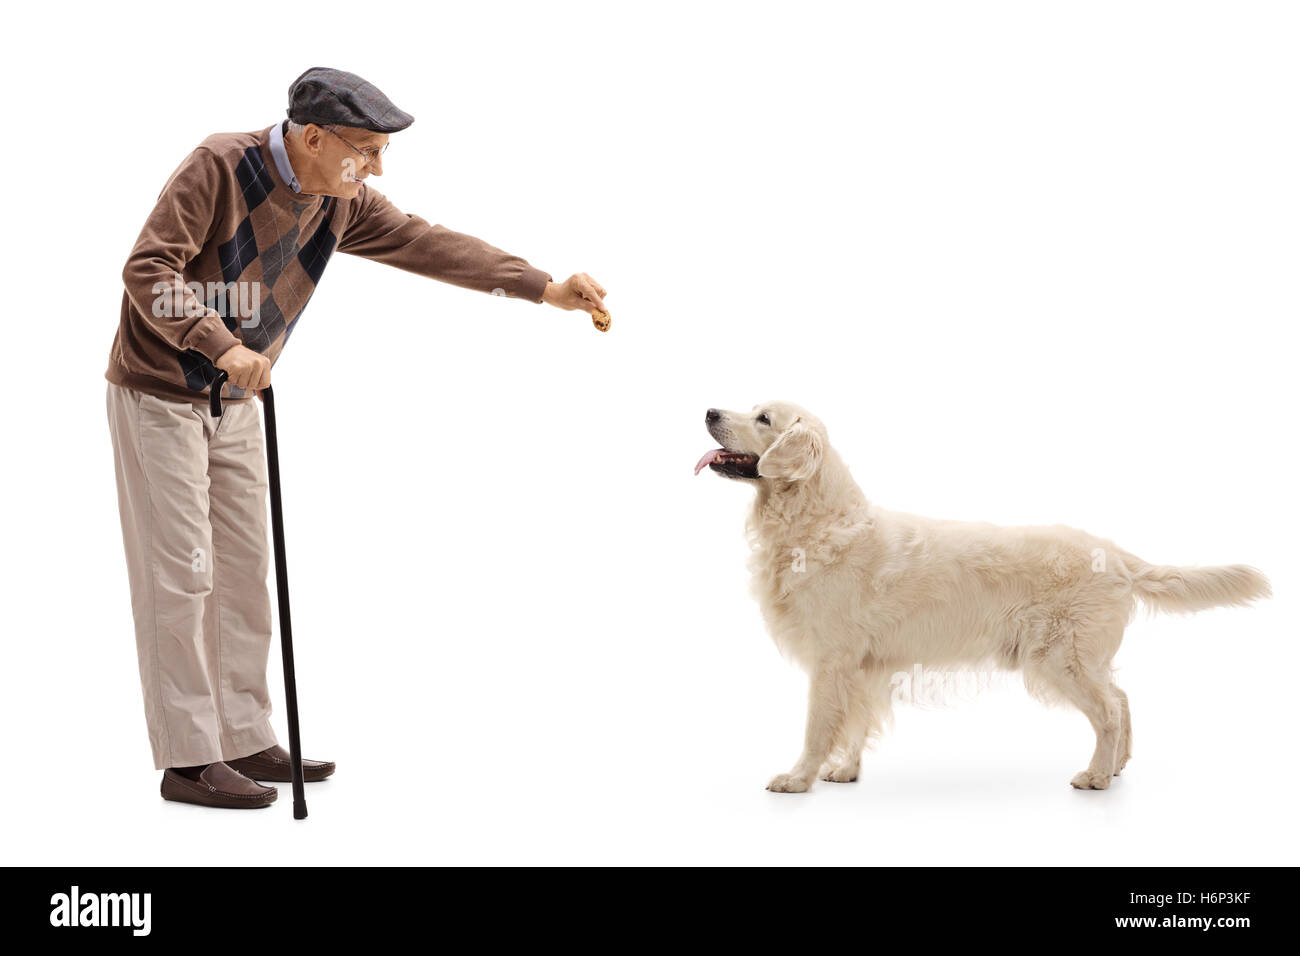 Elderly man giving a cookie to a dog isolated on white background Stock Photo